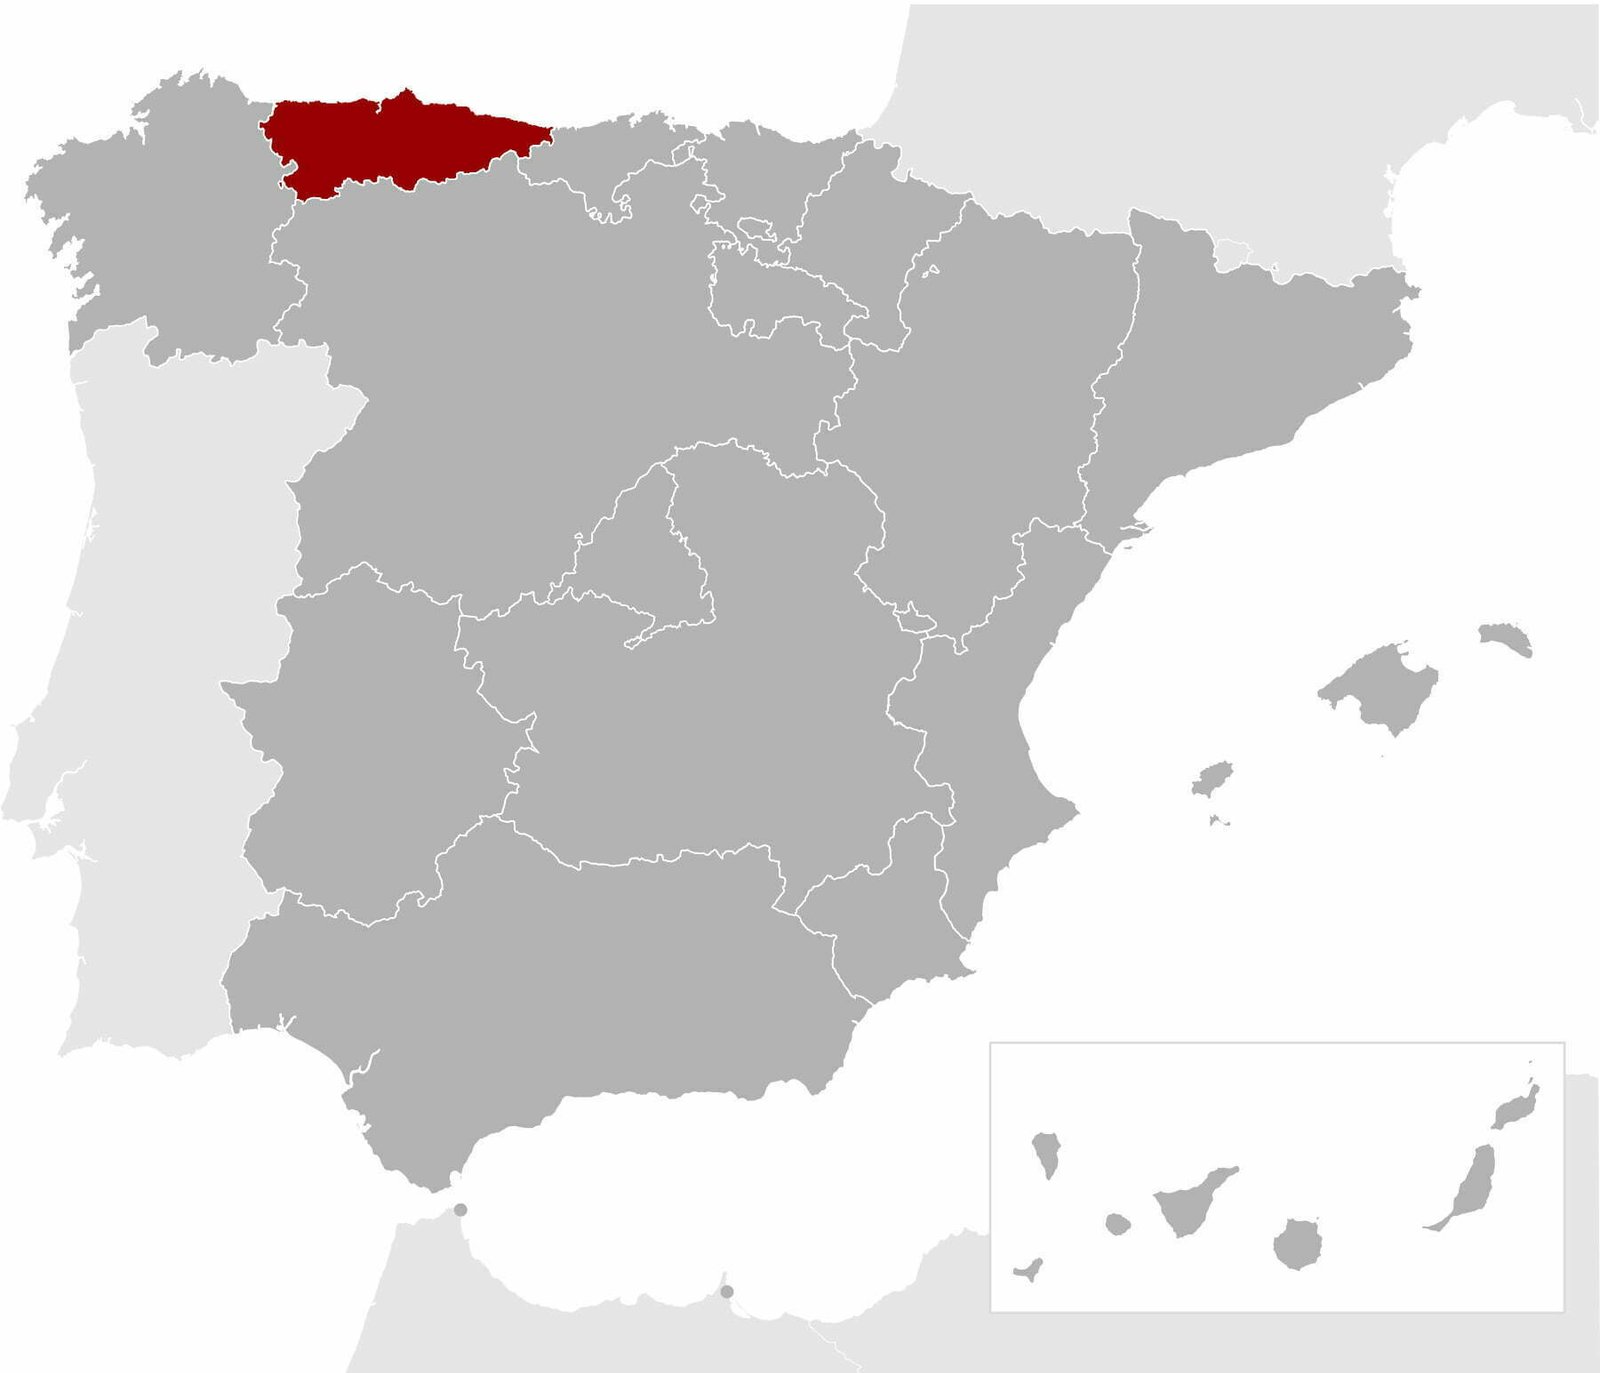 Regional map of Spain with Asturias highlighted in a deep red color